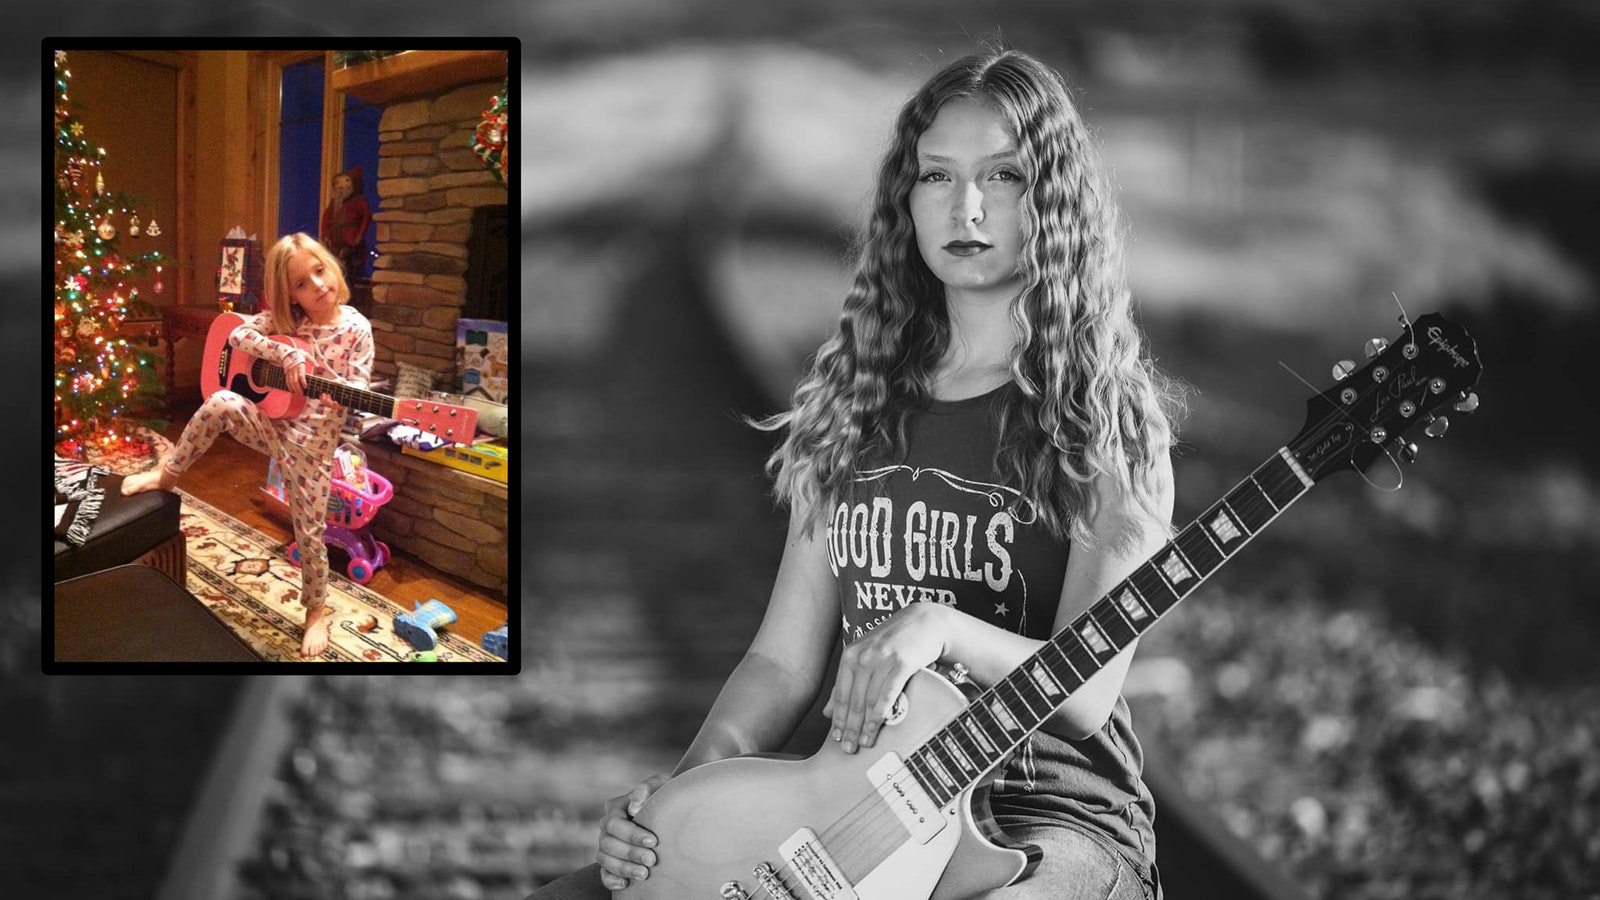 From humble beginnings as a 6-year-old with her first guitar to the axe slinging diva Jillian Nordberg, 15, is today.